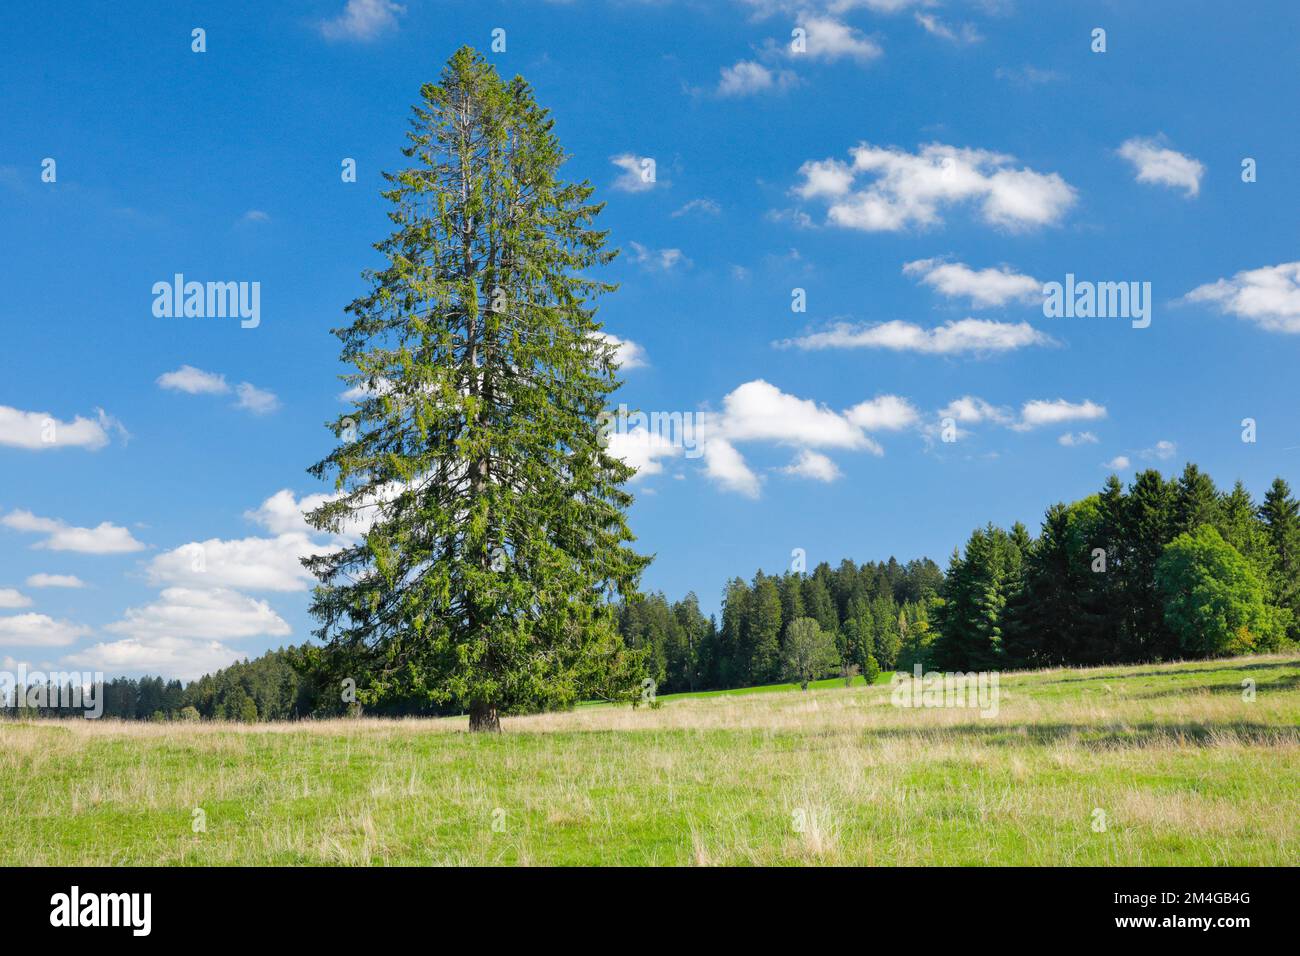 Norway spruce (Picea abies), single large spruce stands in a green meadow, Switzerland, Kanton Jura, Les Breuleux Stock Photo